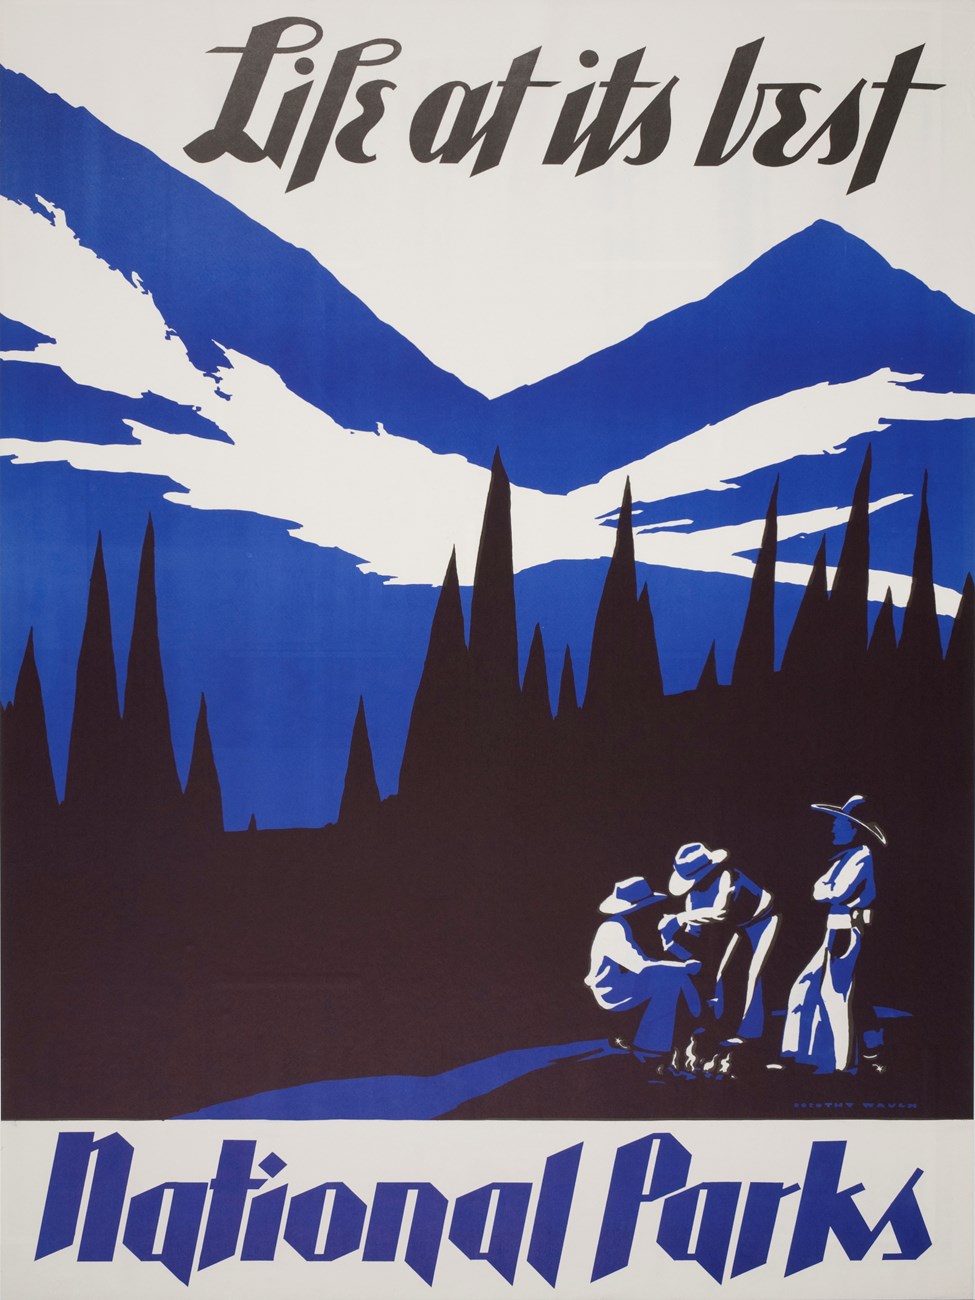 Black, blue, and white poster featuring cowboys, trees, and mountains. "Life at its best" above the mountains and "national parks" along the bottom edge of the poster.